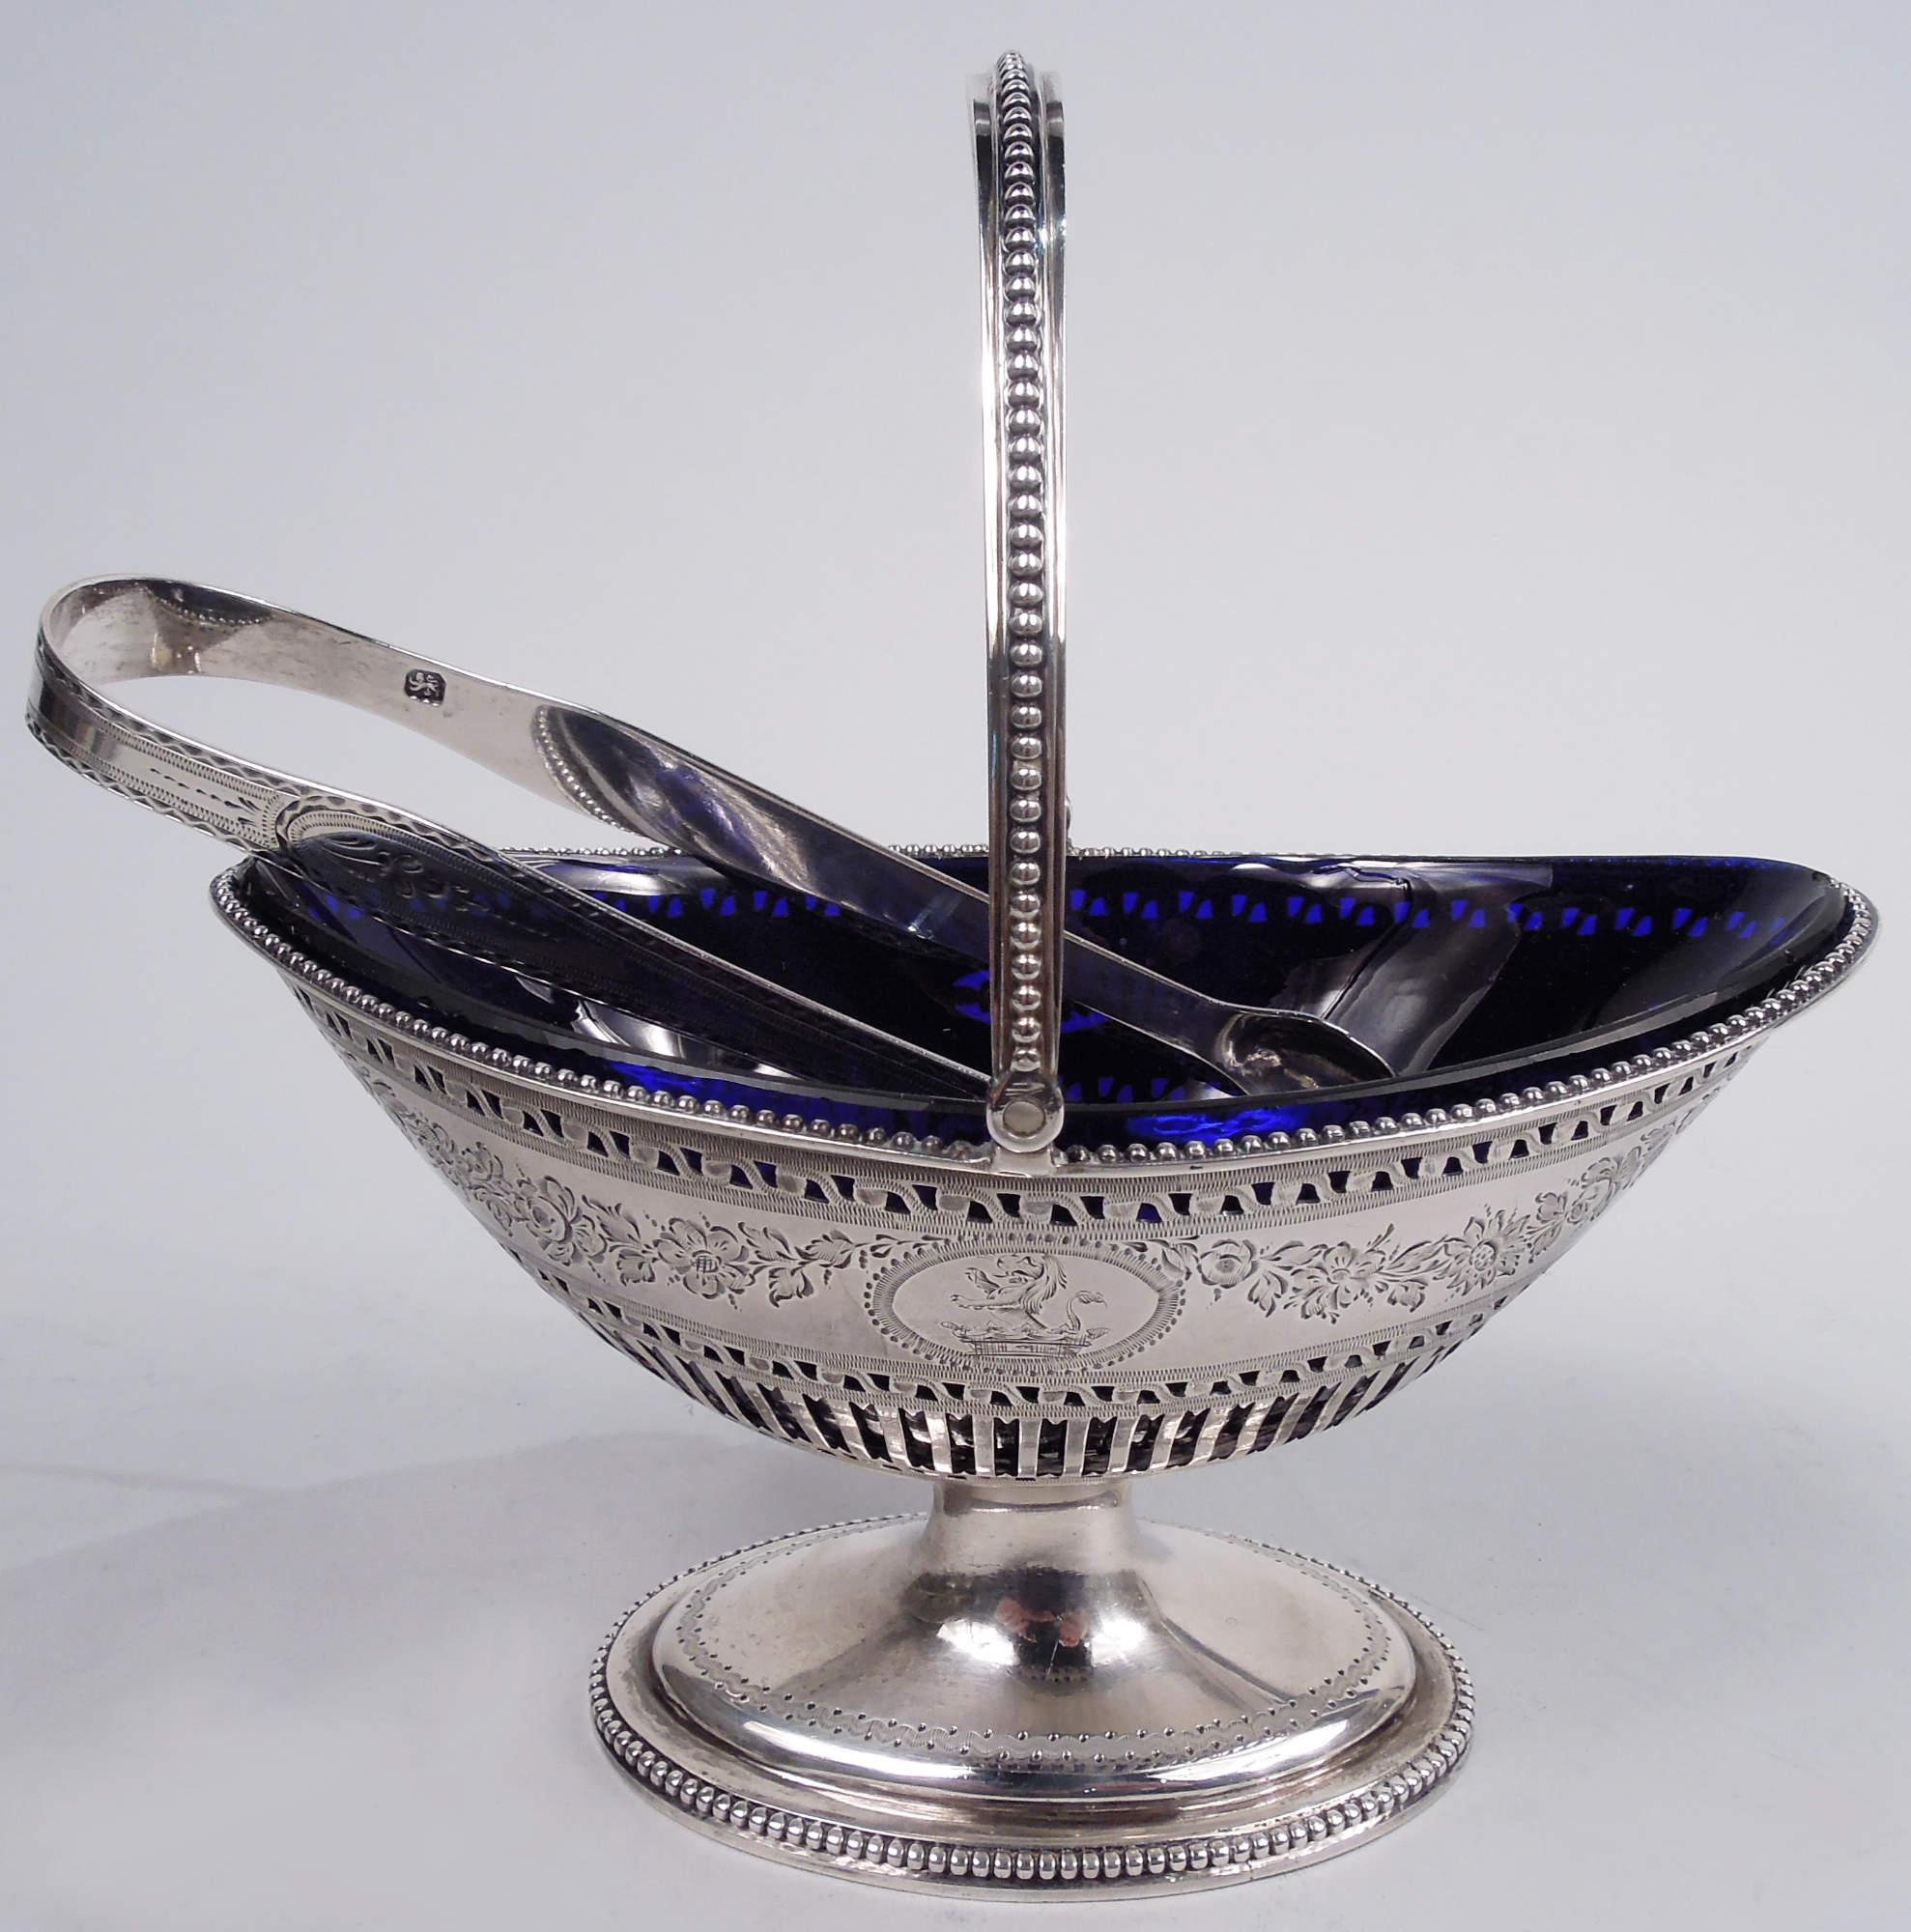 George III sterling silver sugar basket. Made by Hester Bateman in London in 1784. Ovoid bowl with c-scroll swing handle and raised foot. Pierced colonnade and rinceaux as well as ovals inset with paterae. Engraved garland. Beading. Cobalt glass